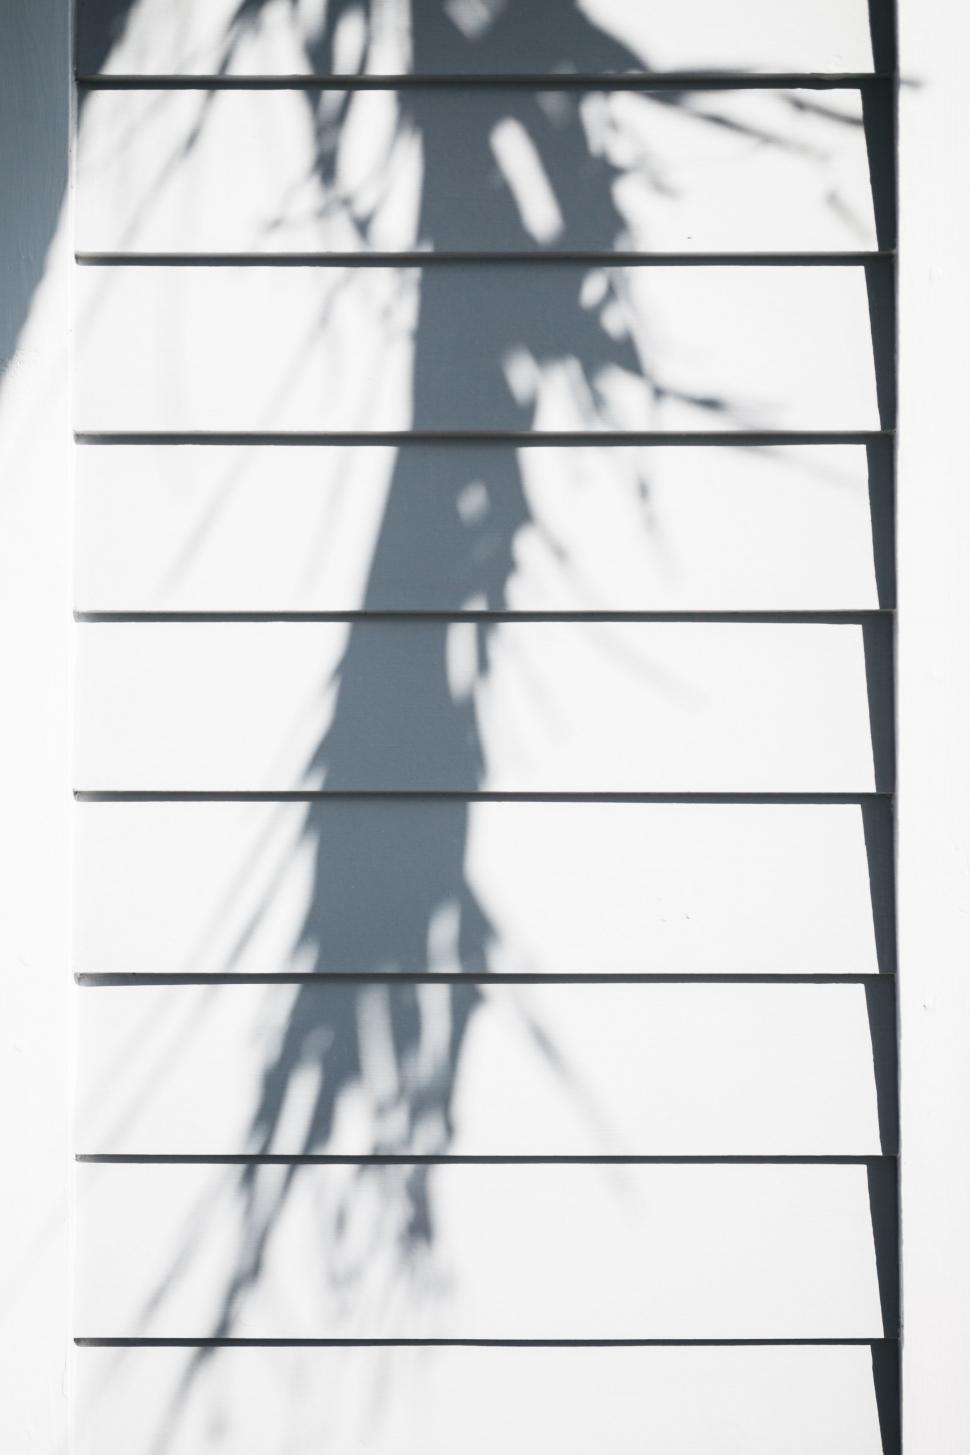 Free Image of Shadow of a Plant on a Wall 